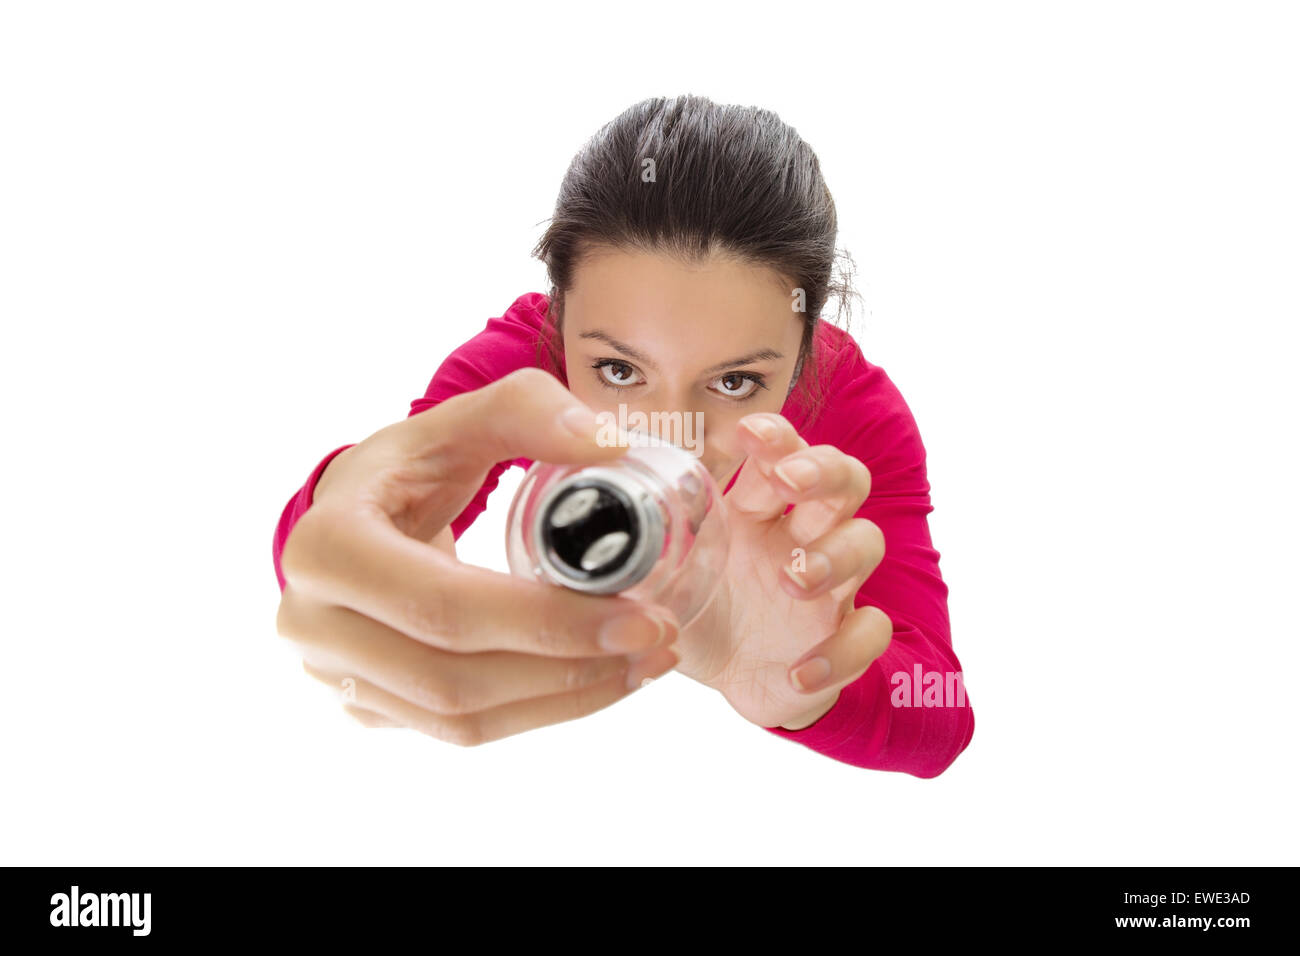 woman changing a light bulb shot from a birds eye view looking down Stock Photo